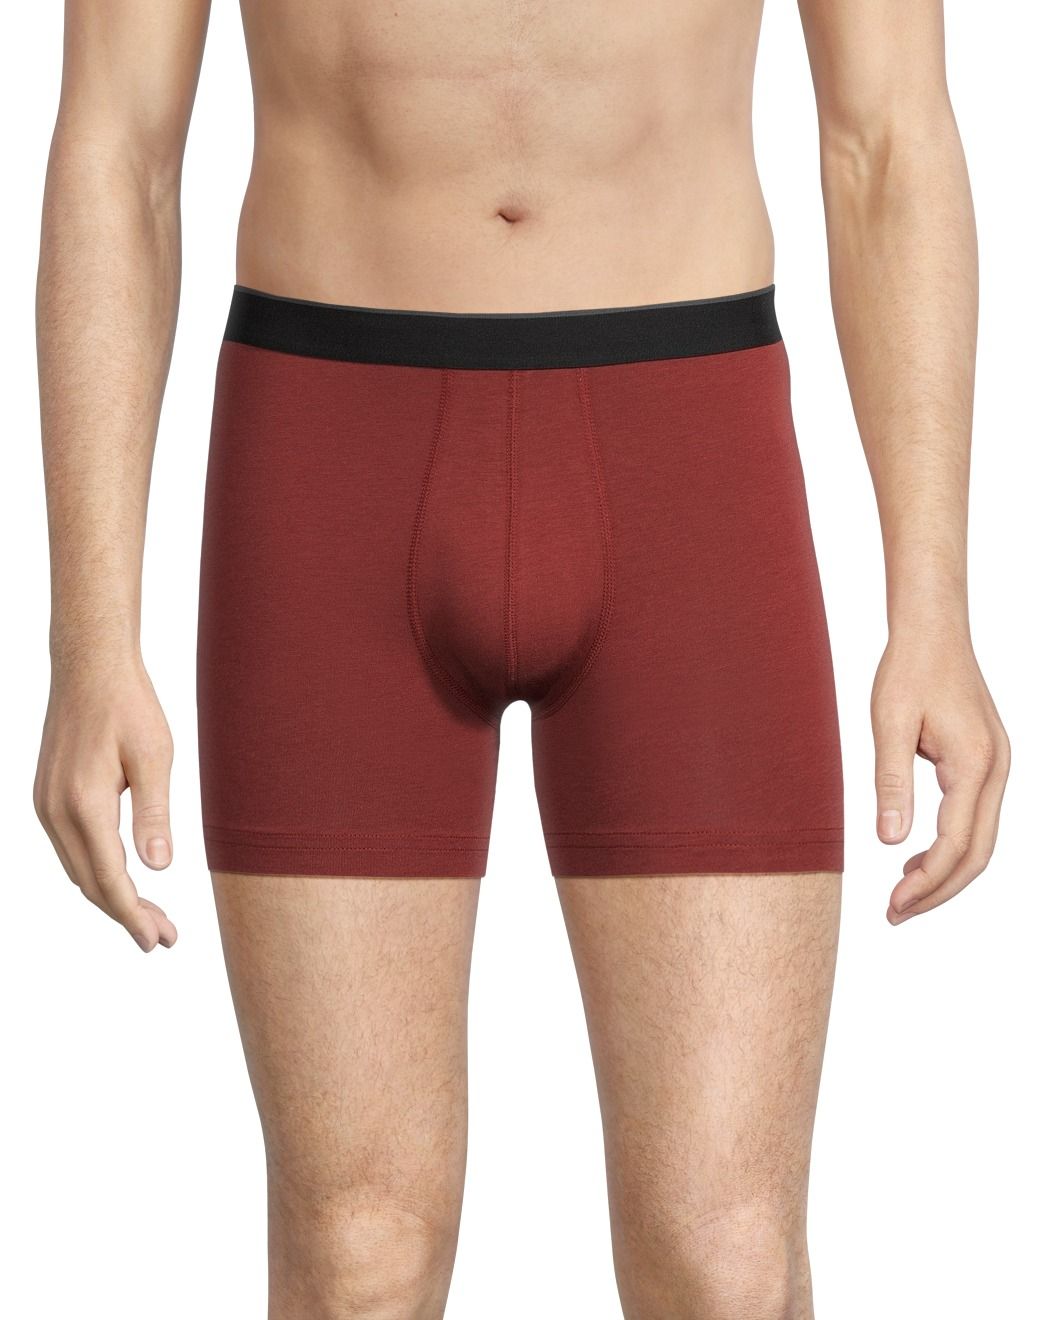 Bamboo Men's Underwear • compare today & find prices »